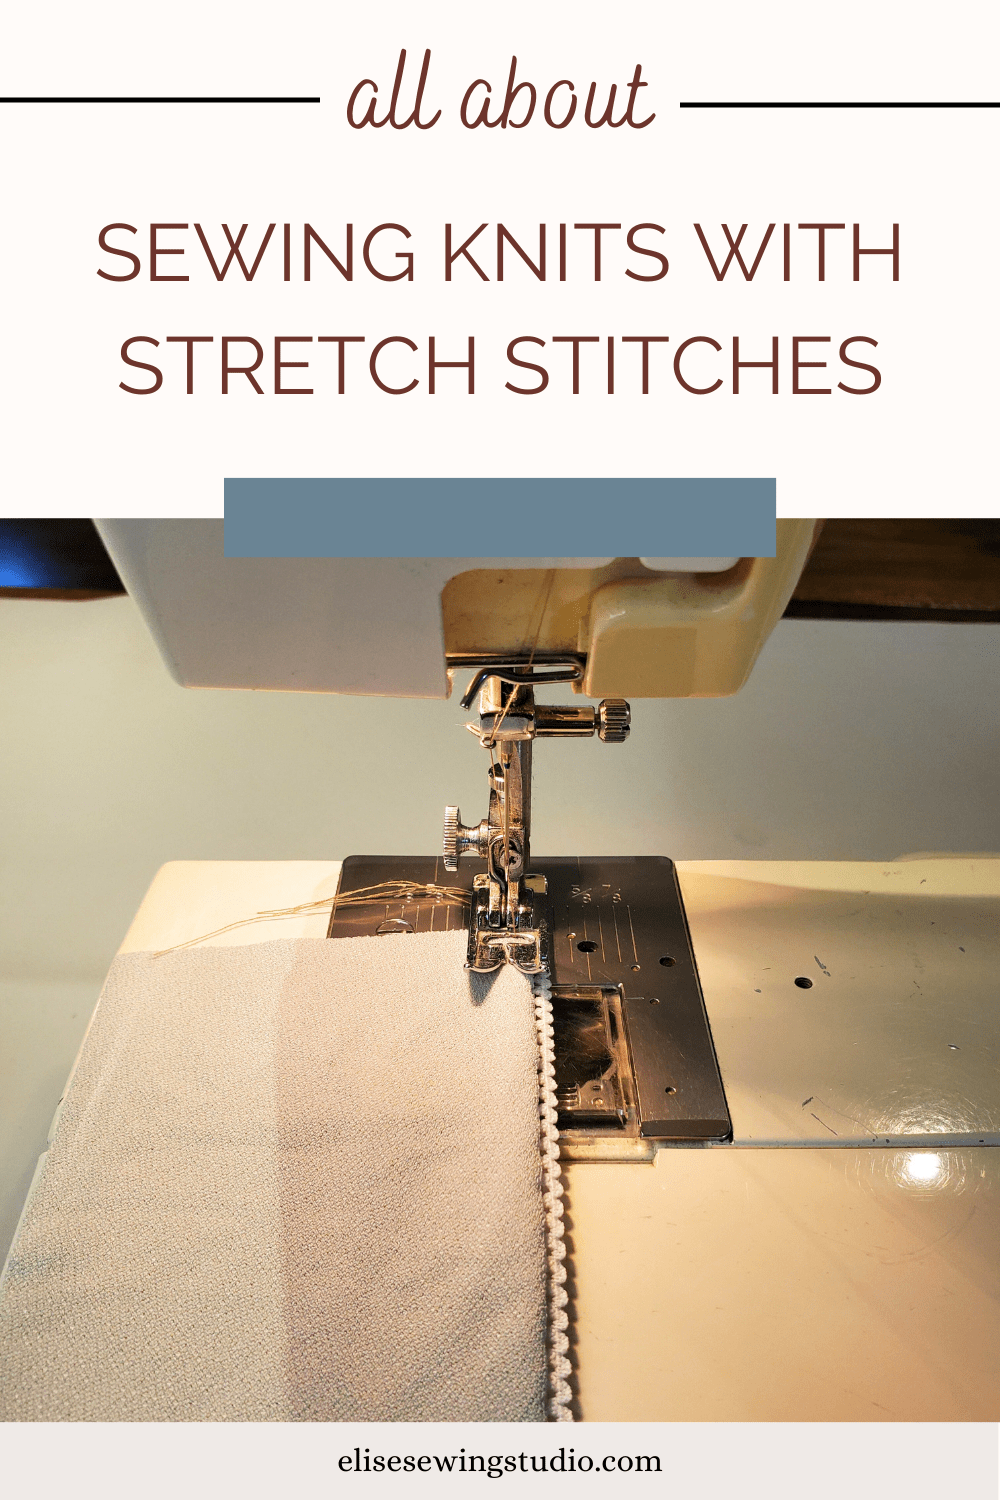 Guide to sewing machine needles for knits - The Last Stitch